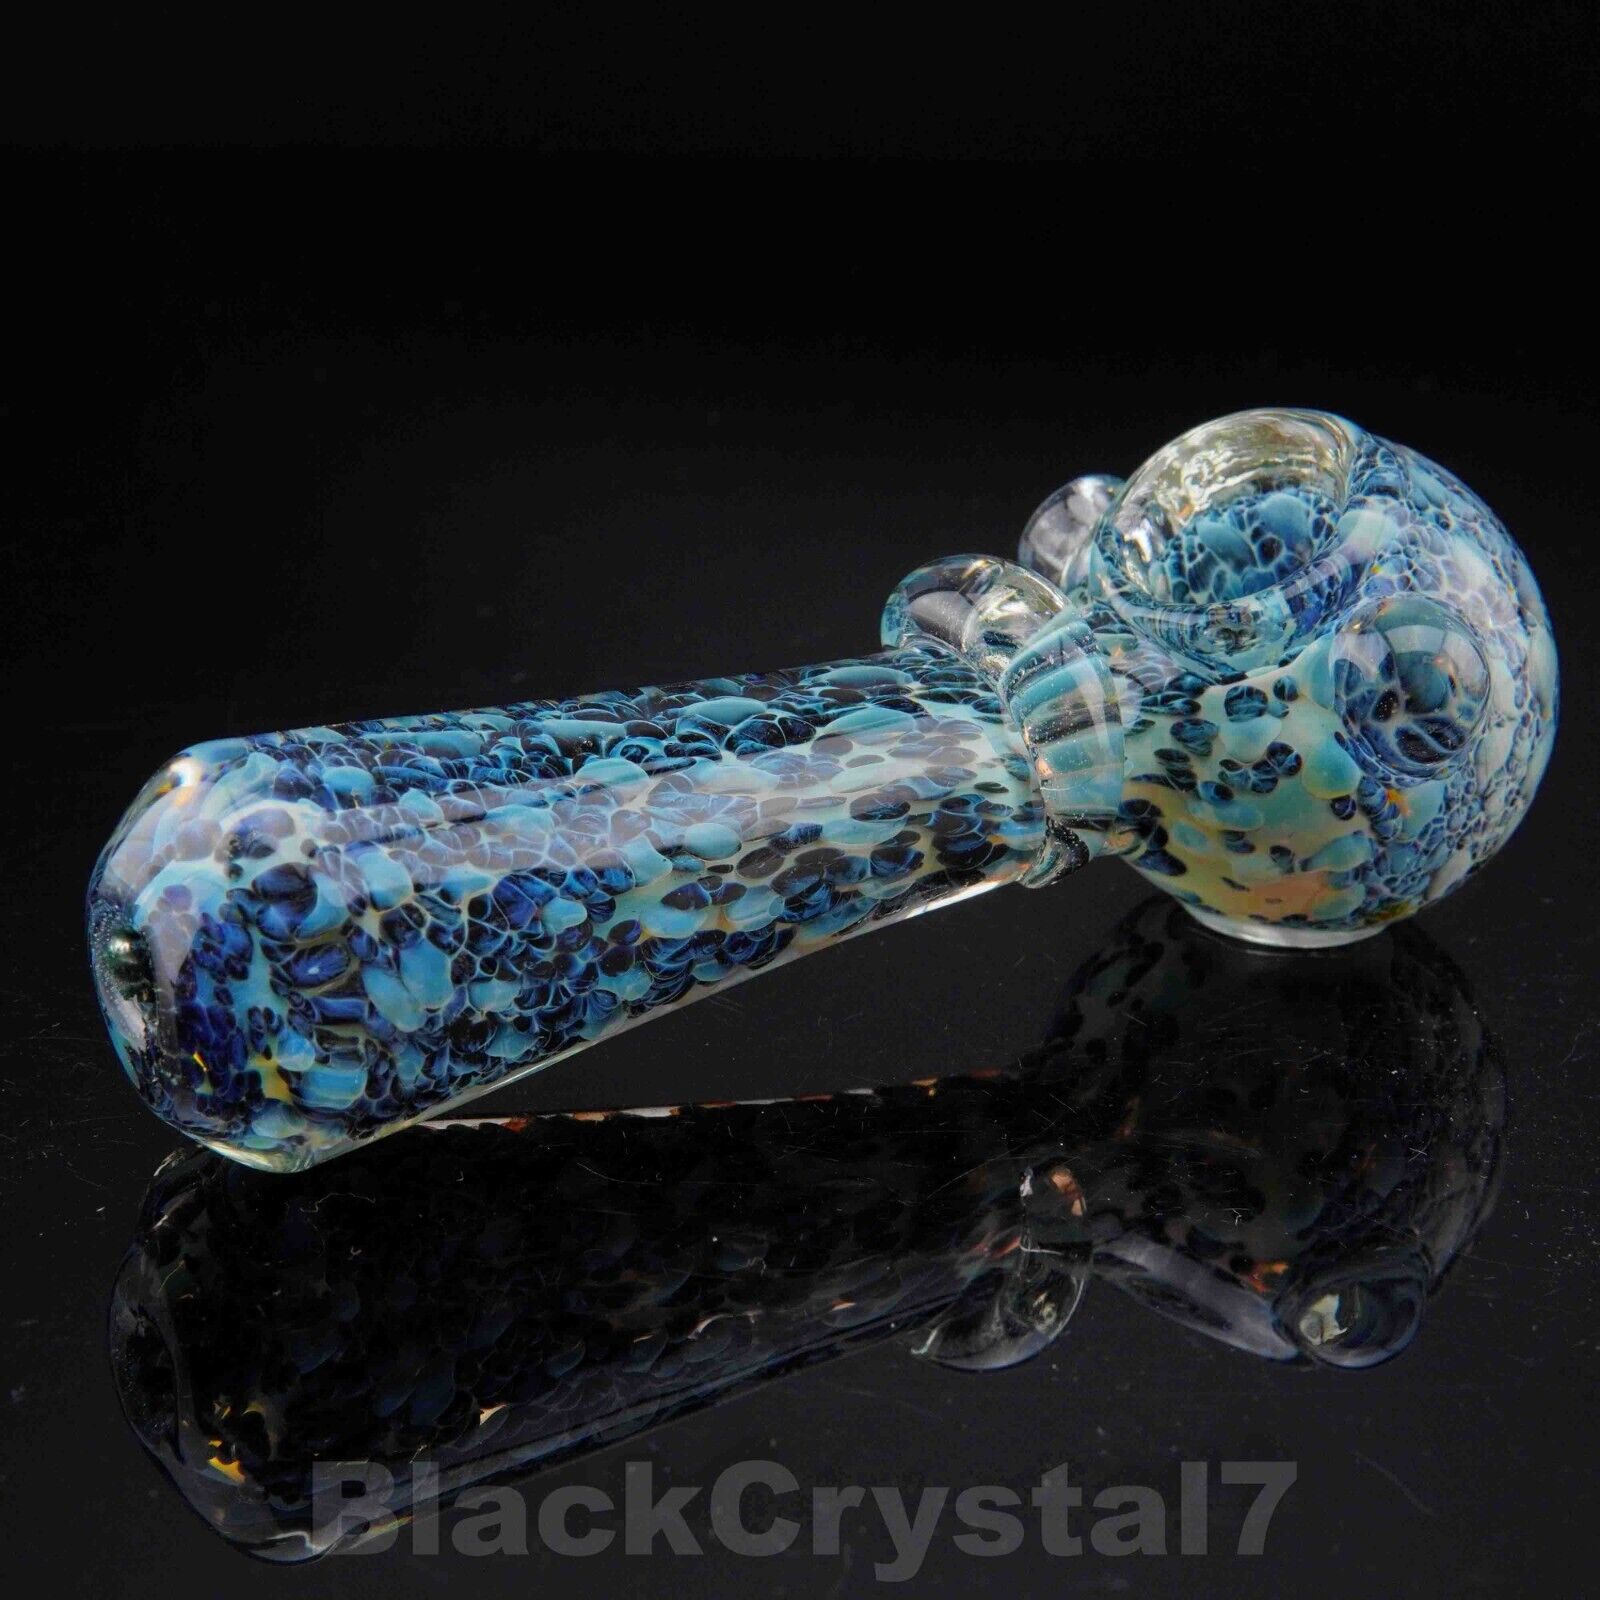 5 inch Handmade Thick Heavy Frit Midnight Blue Tobacco Smoking Bowl Glass Pipes